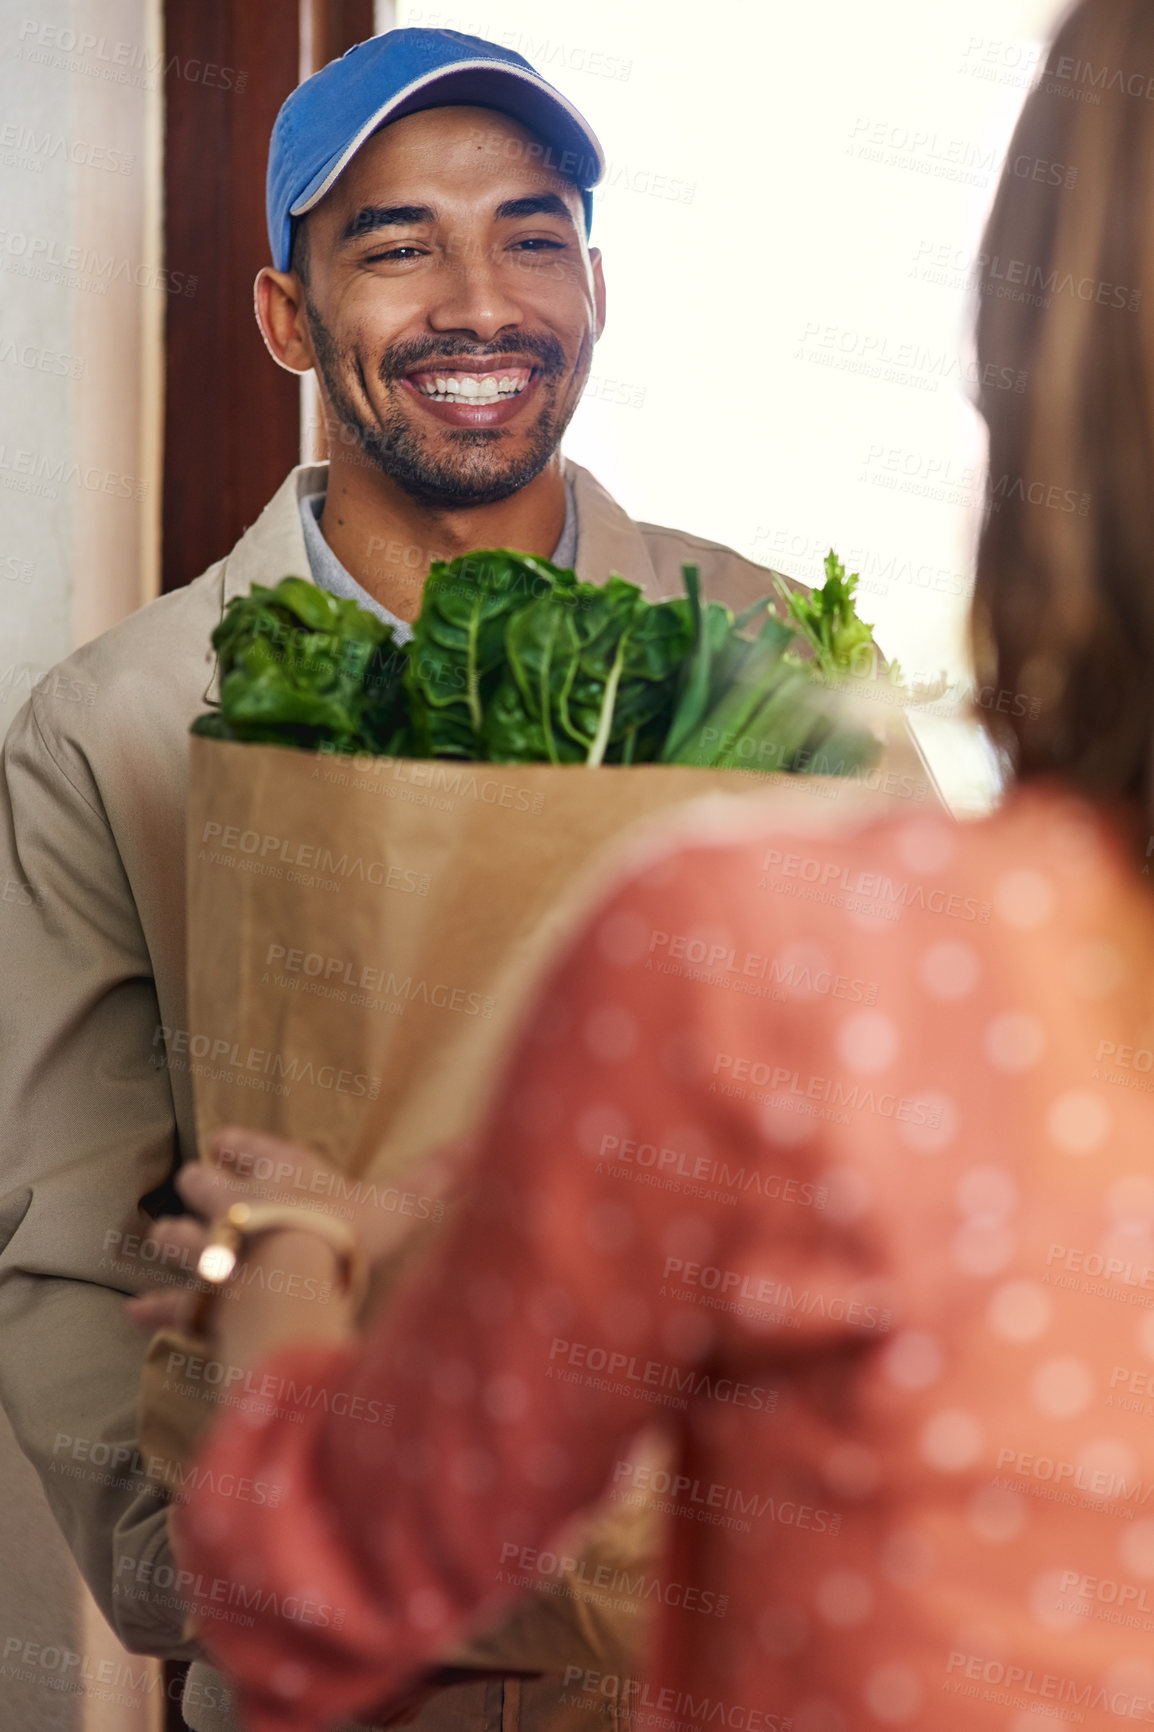 Buy stock photo Cropped shot of a handsome young man delivering groceries to a female customer